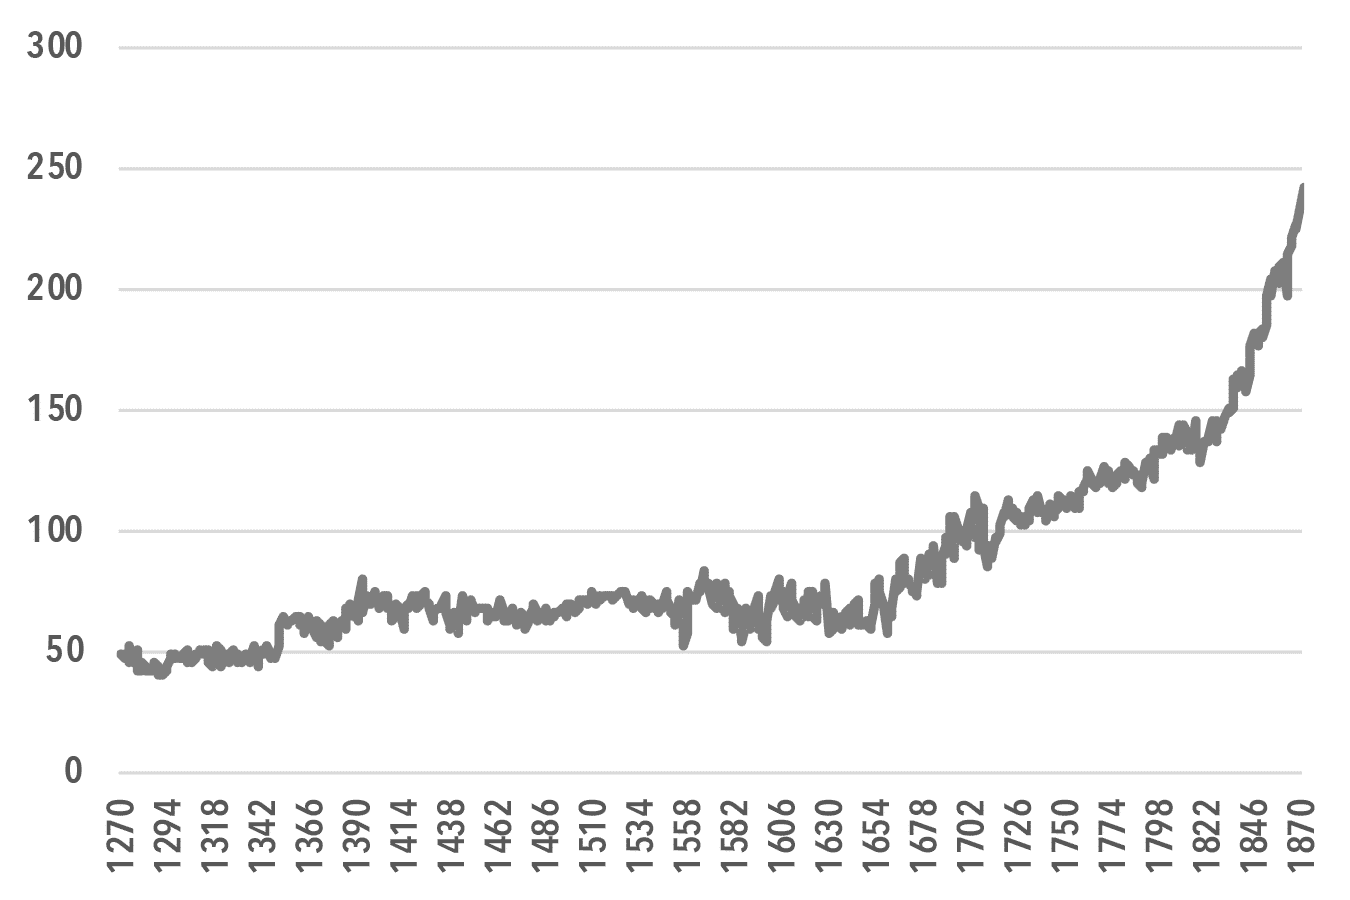 https://monthlyreview.org/wp-content/uploads/2020/12/chart7_Real-GDP-per-Capita-1270-to-1870-log-scale-1700100.png